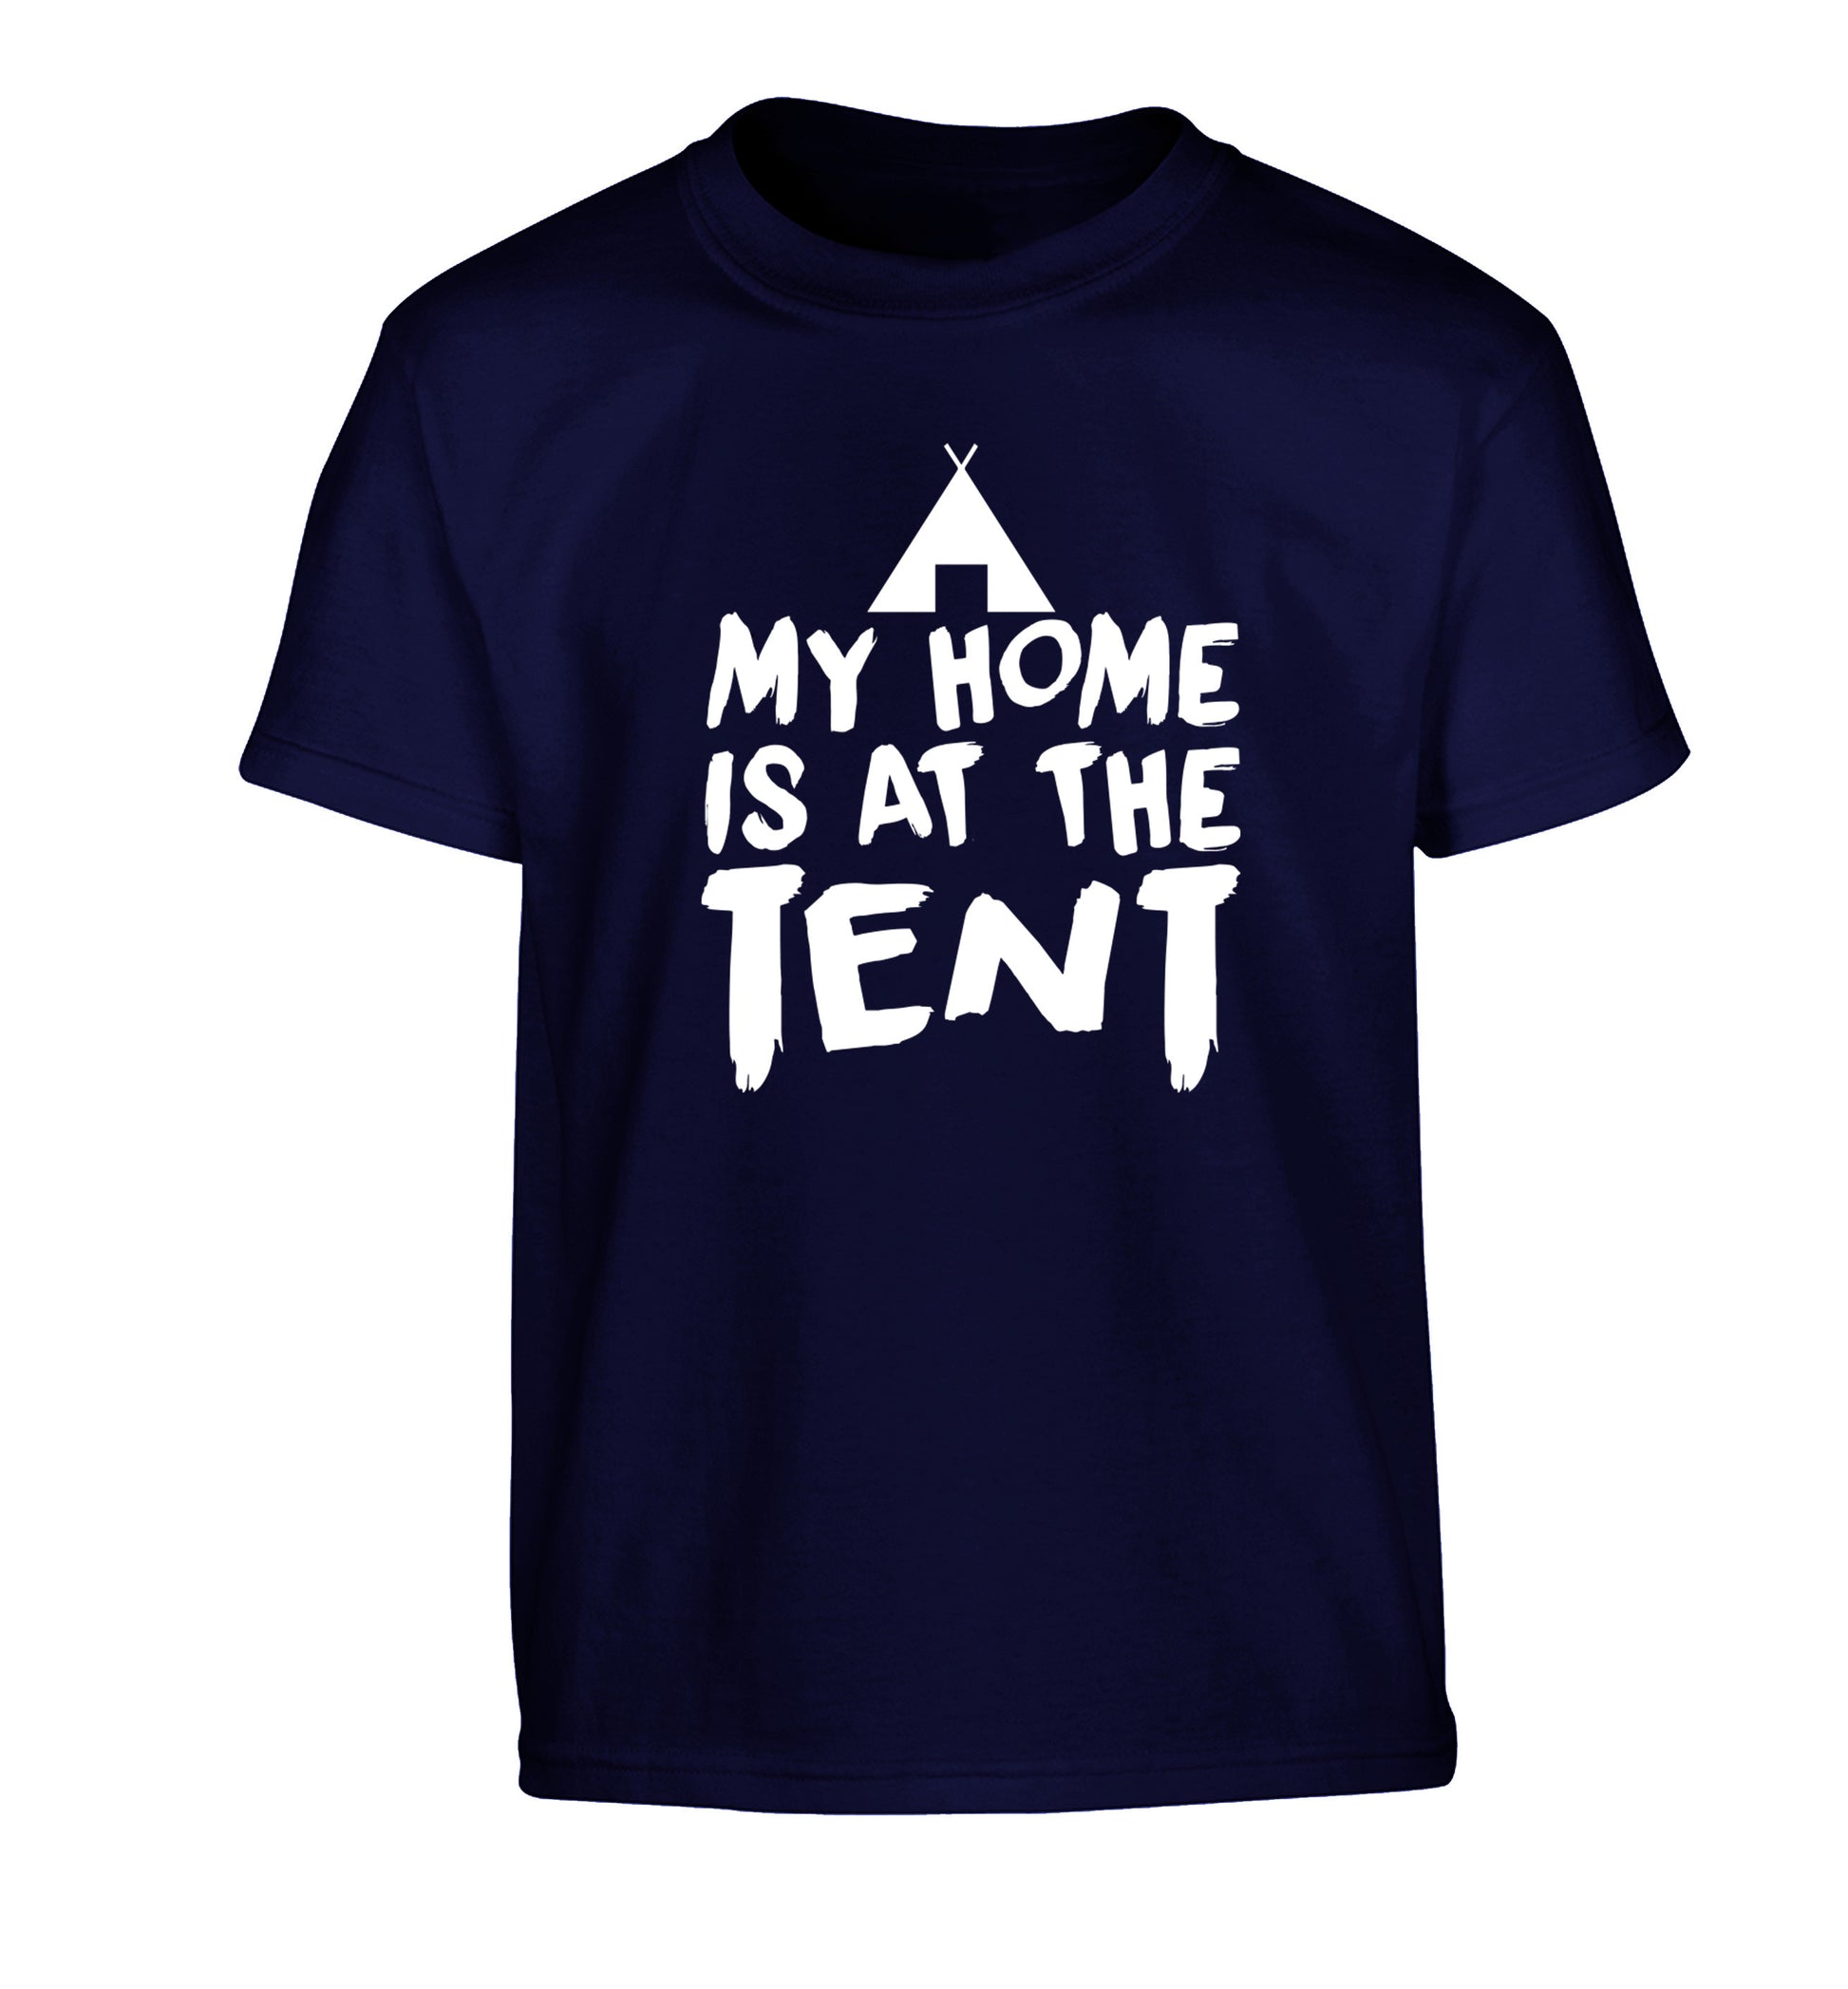 My home is at the tent Children's navy Tshirt 12-14 Years